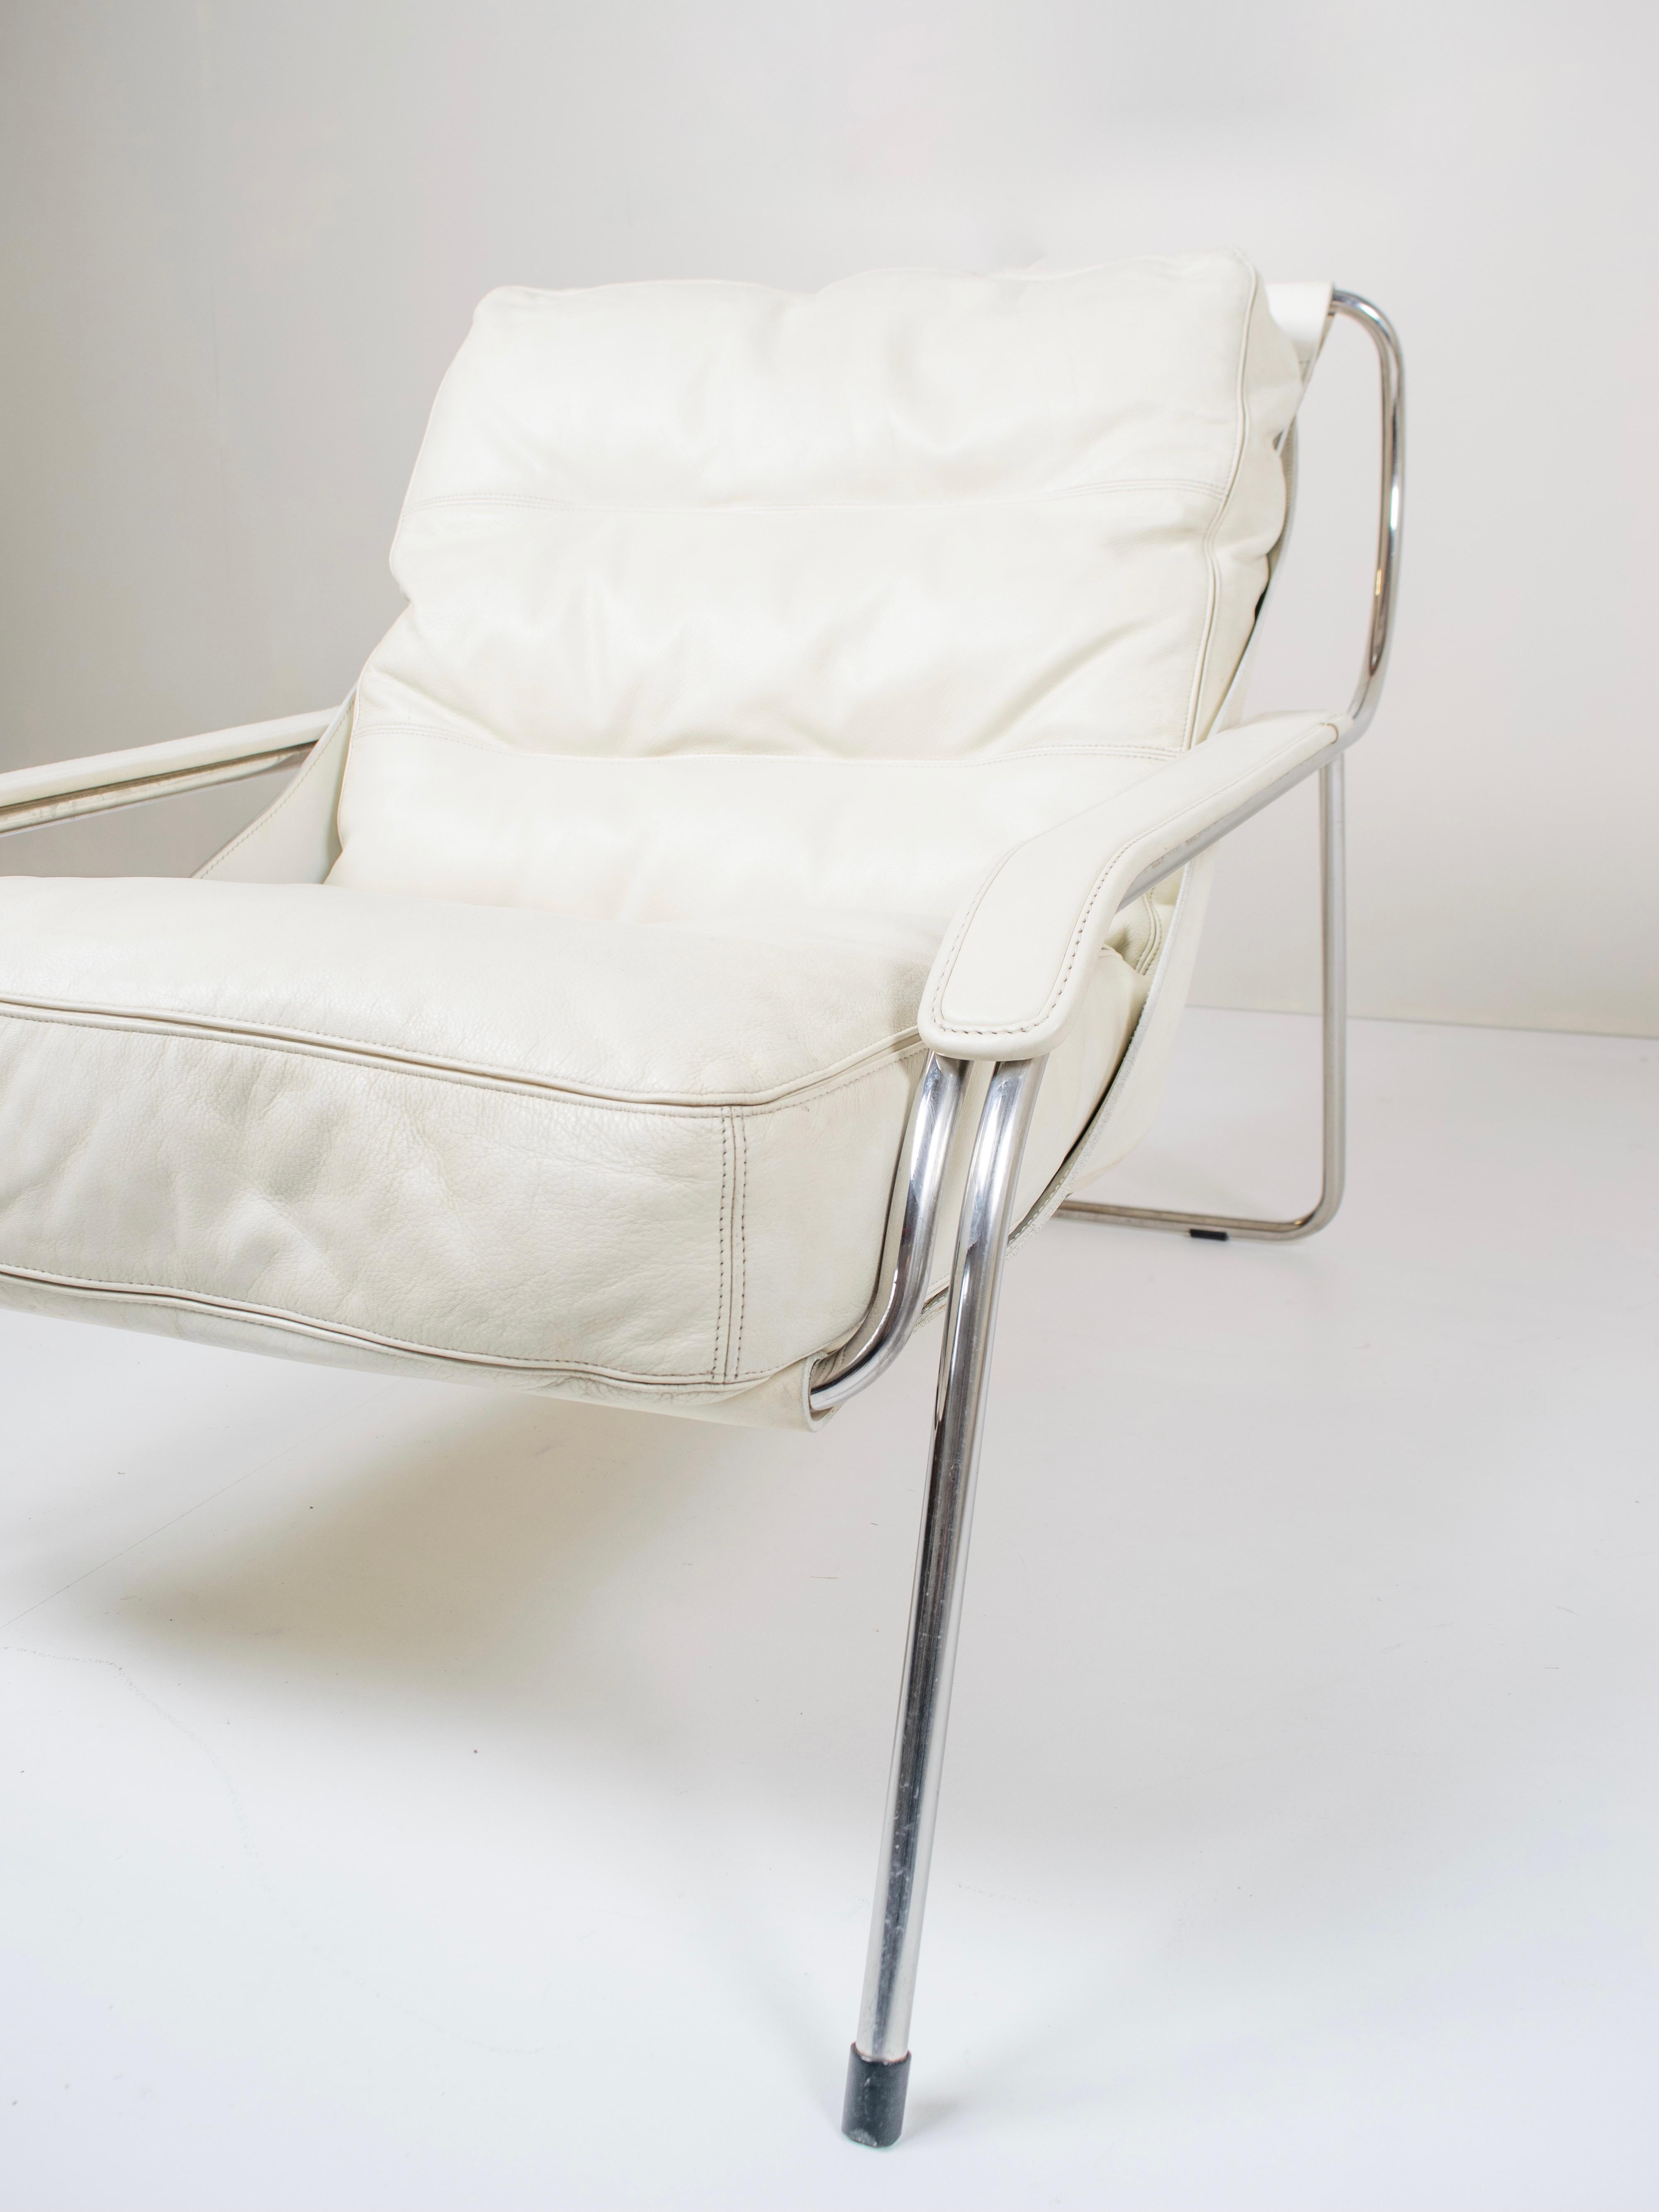 Pair of Marco Zanuso Maggiolina White Leather Chairs by Zanotta, Italy, 1947 4